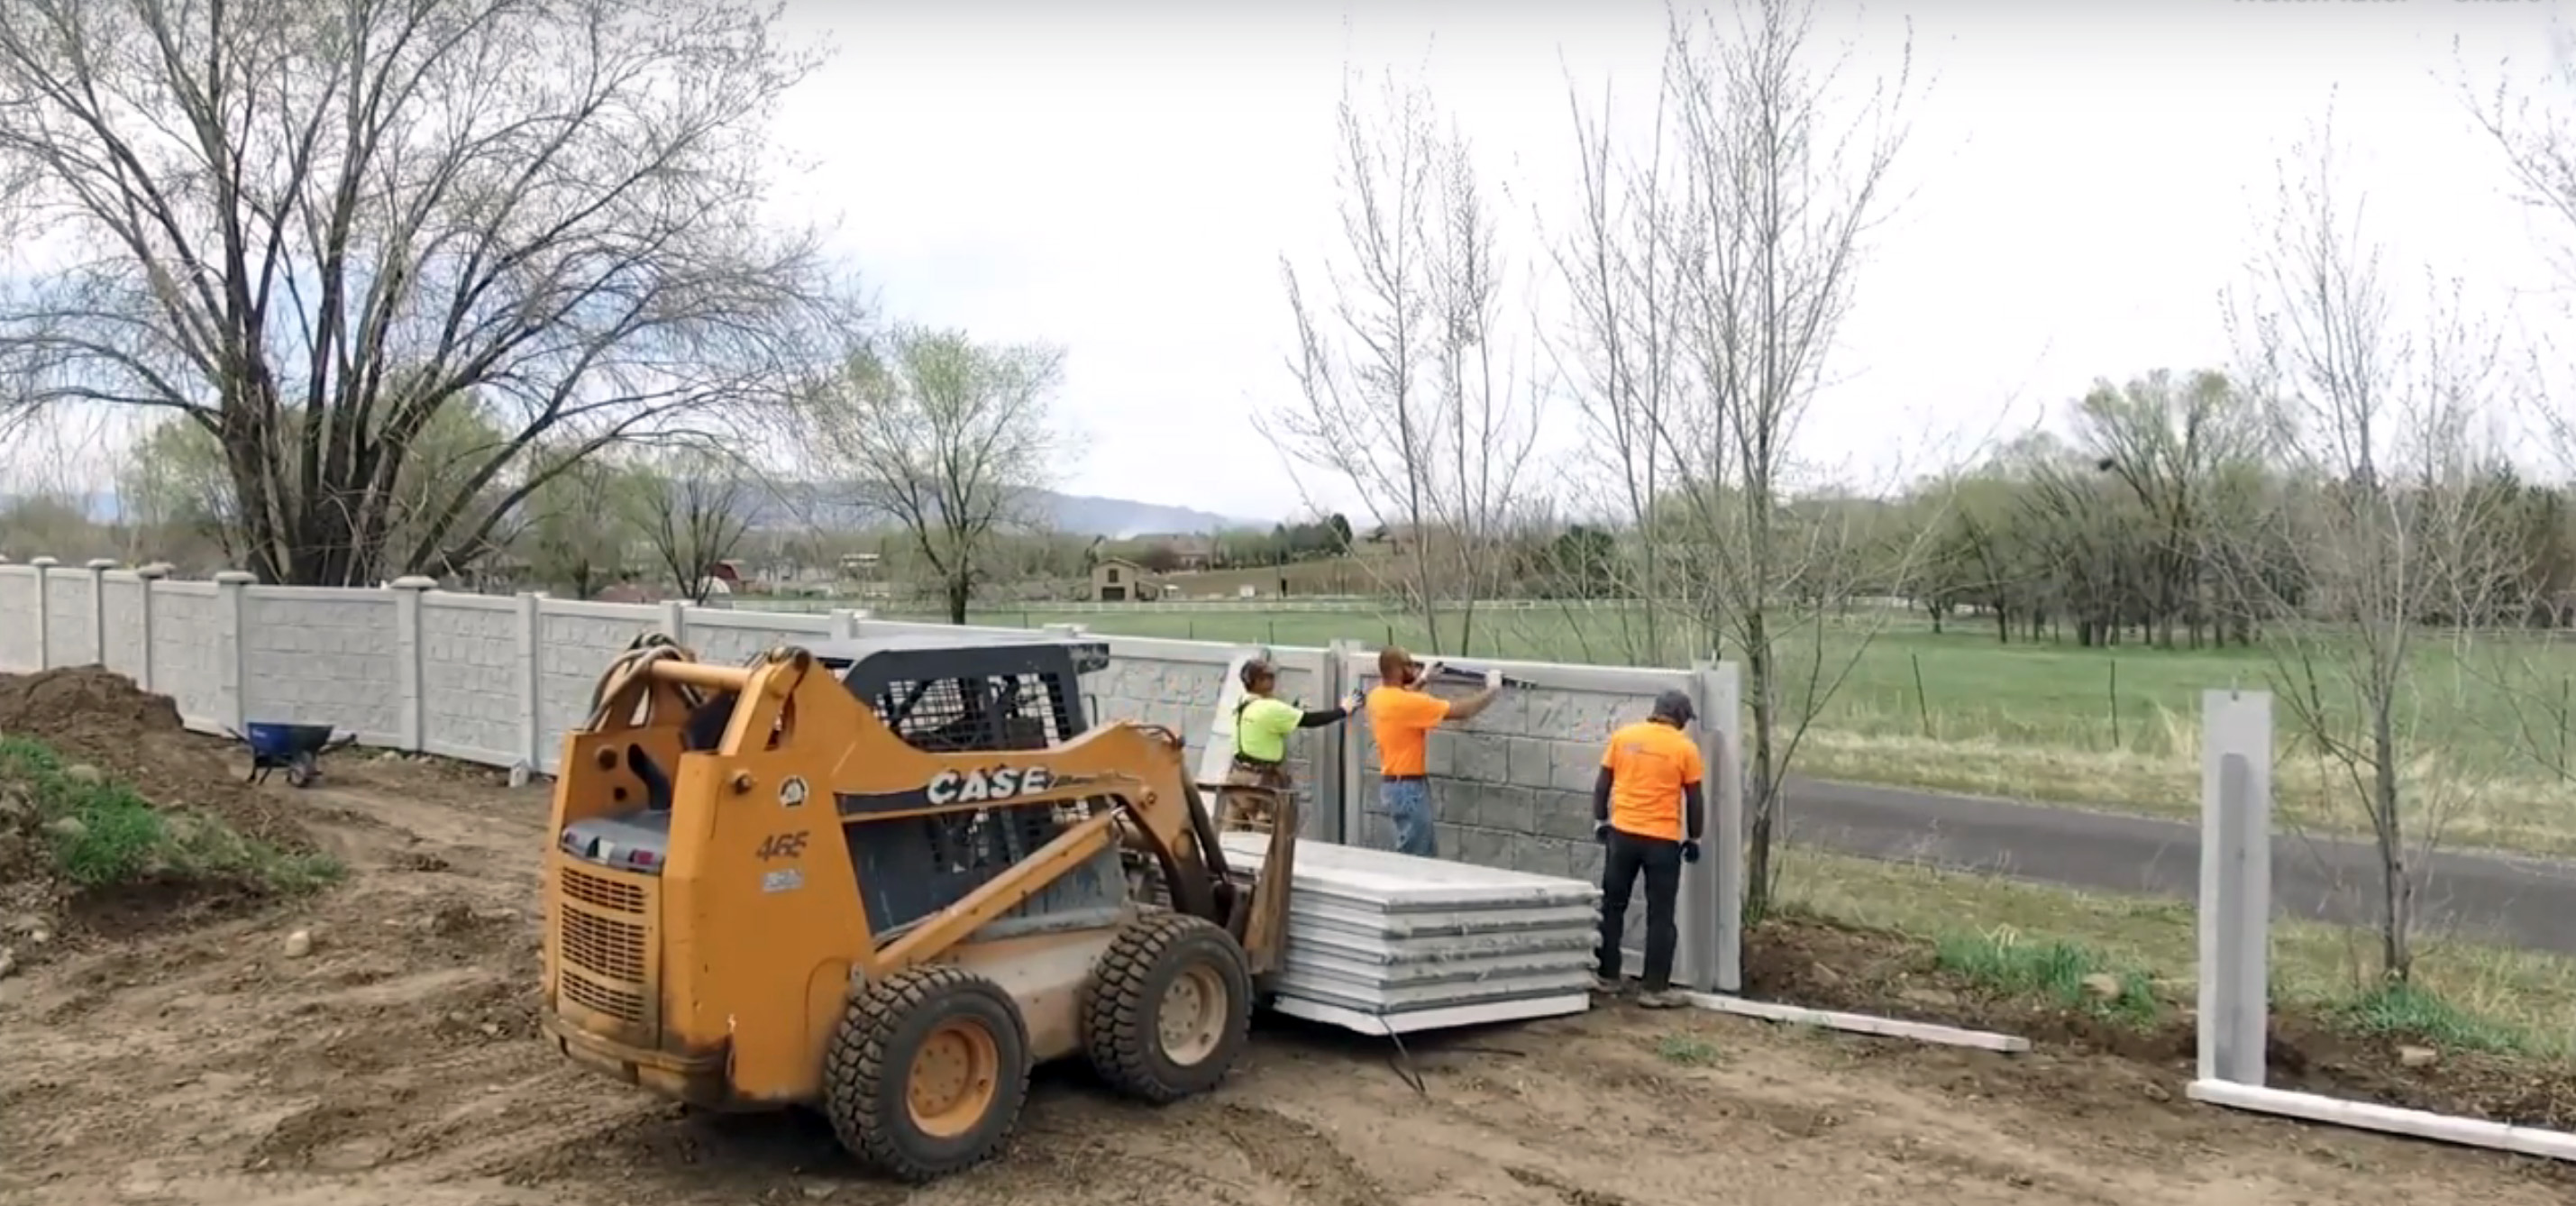 WATCH CREW INSTALL 100′ FENCE PANELS IN 10 MINUTES